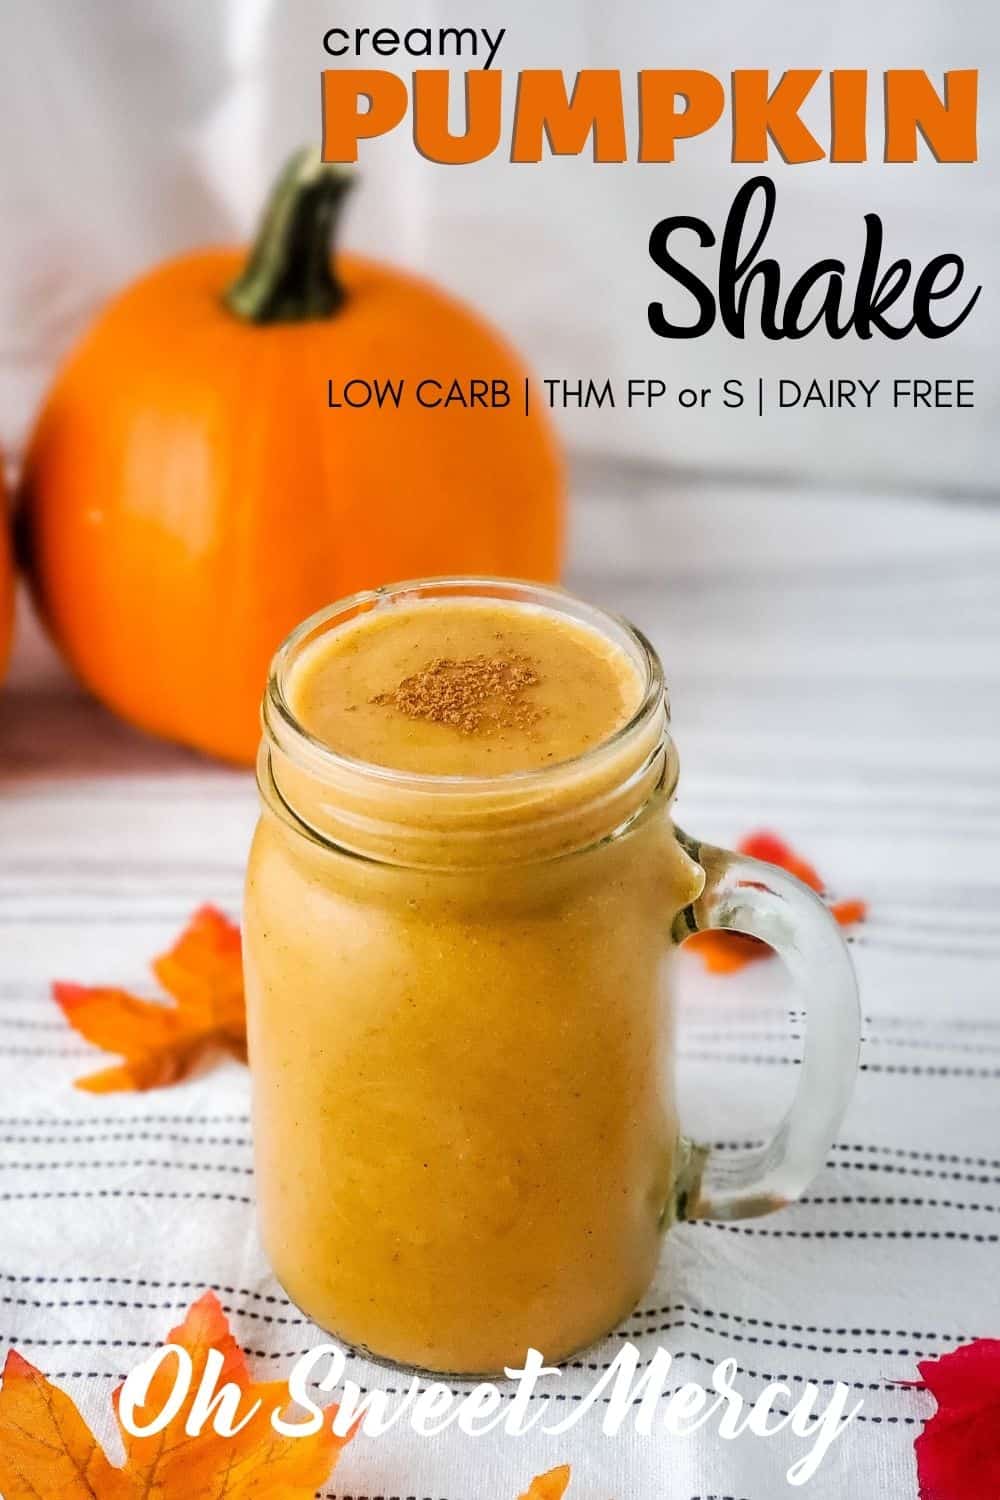 My Low Carb Pumpkin Shake is not only sugar free but dairy free. It's still thick and creamy and so delicious! You'll never know it's also low fat, and a perfect THM FP treat any time of year. #thm #fuelpull #thmshakes #pumpkin #lowcarb #lowfat #sugarfree #dairyfree #vegan #plantbased @ohsweetmercy